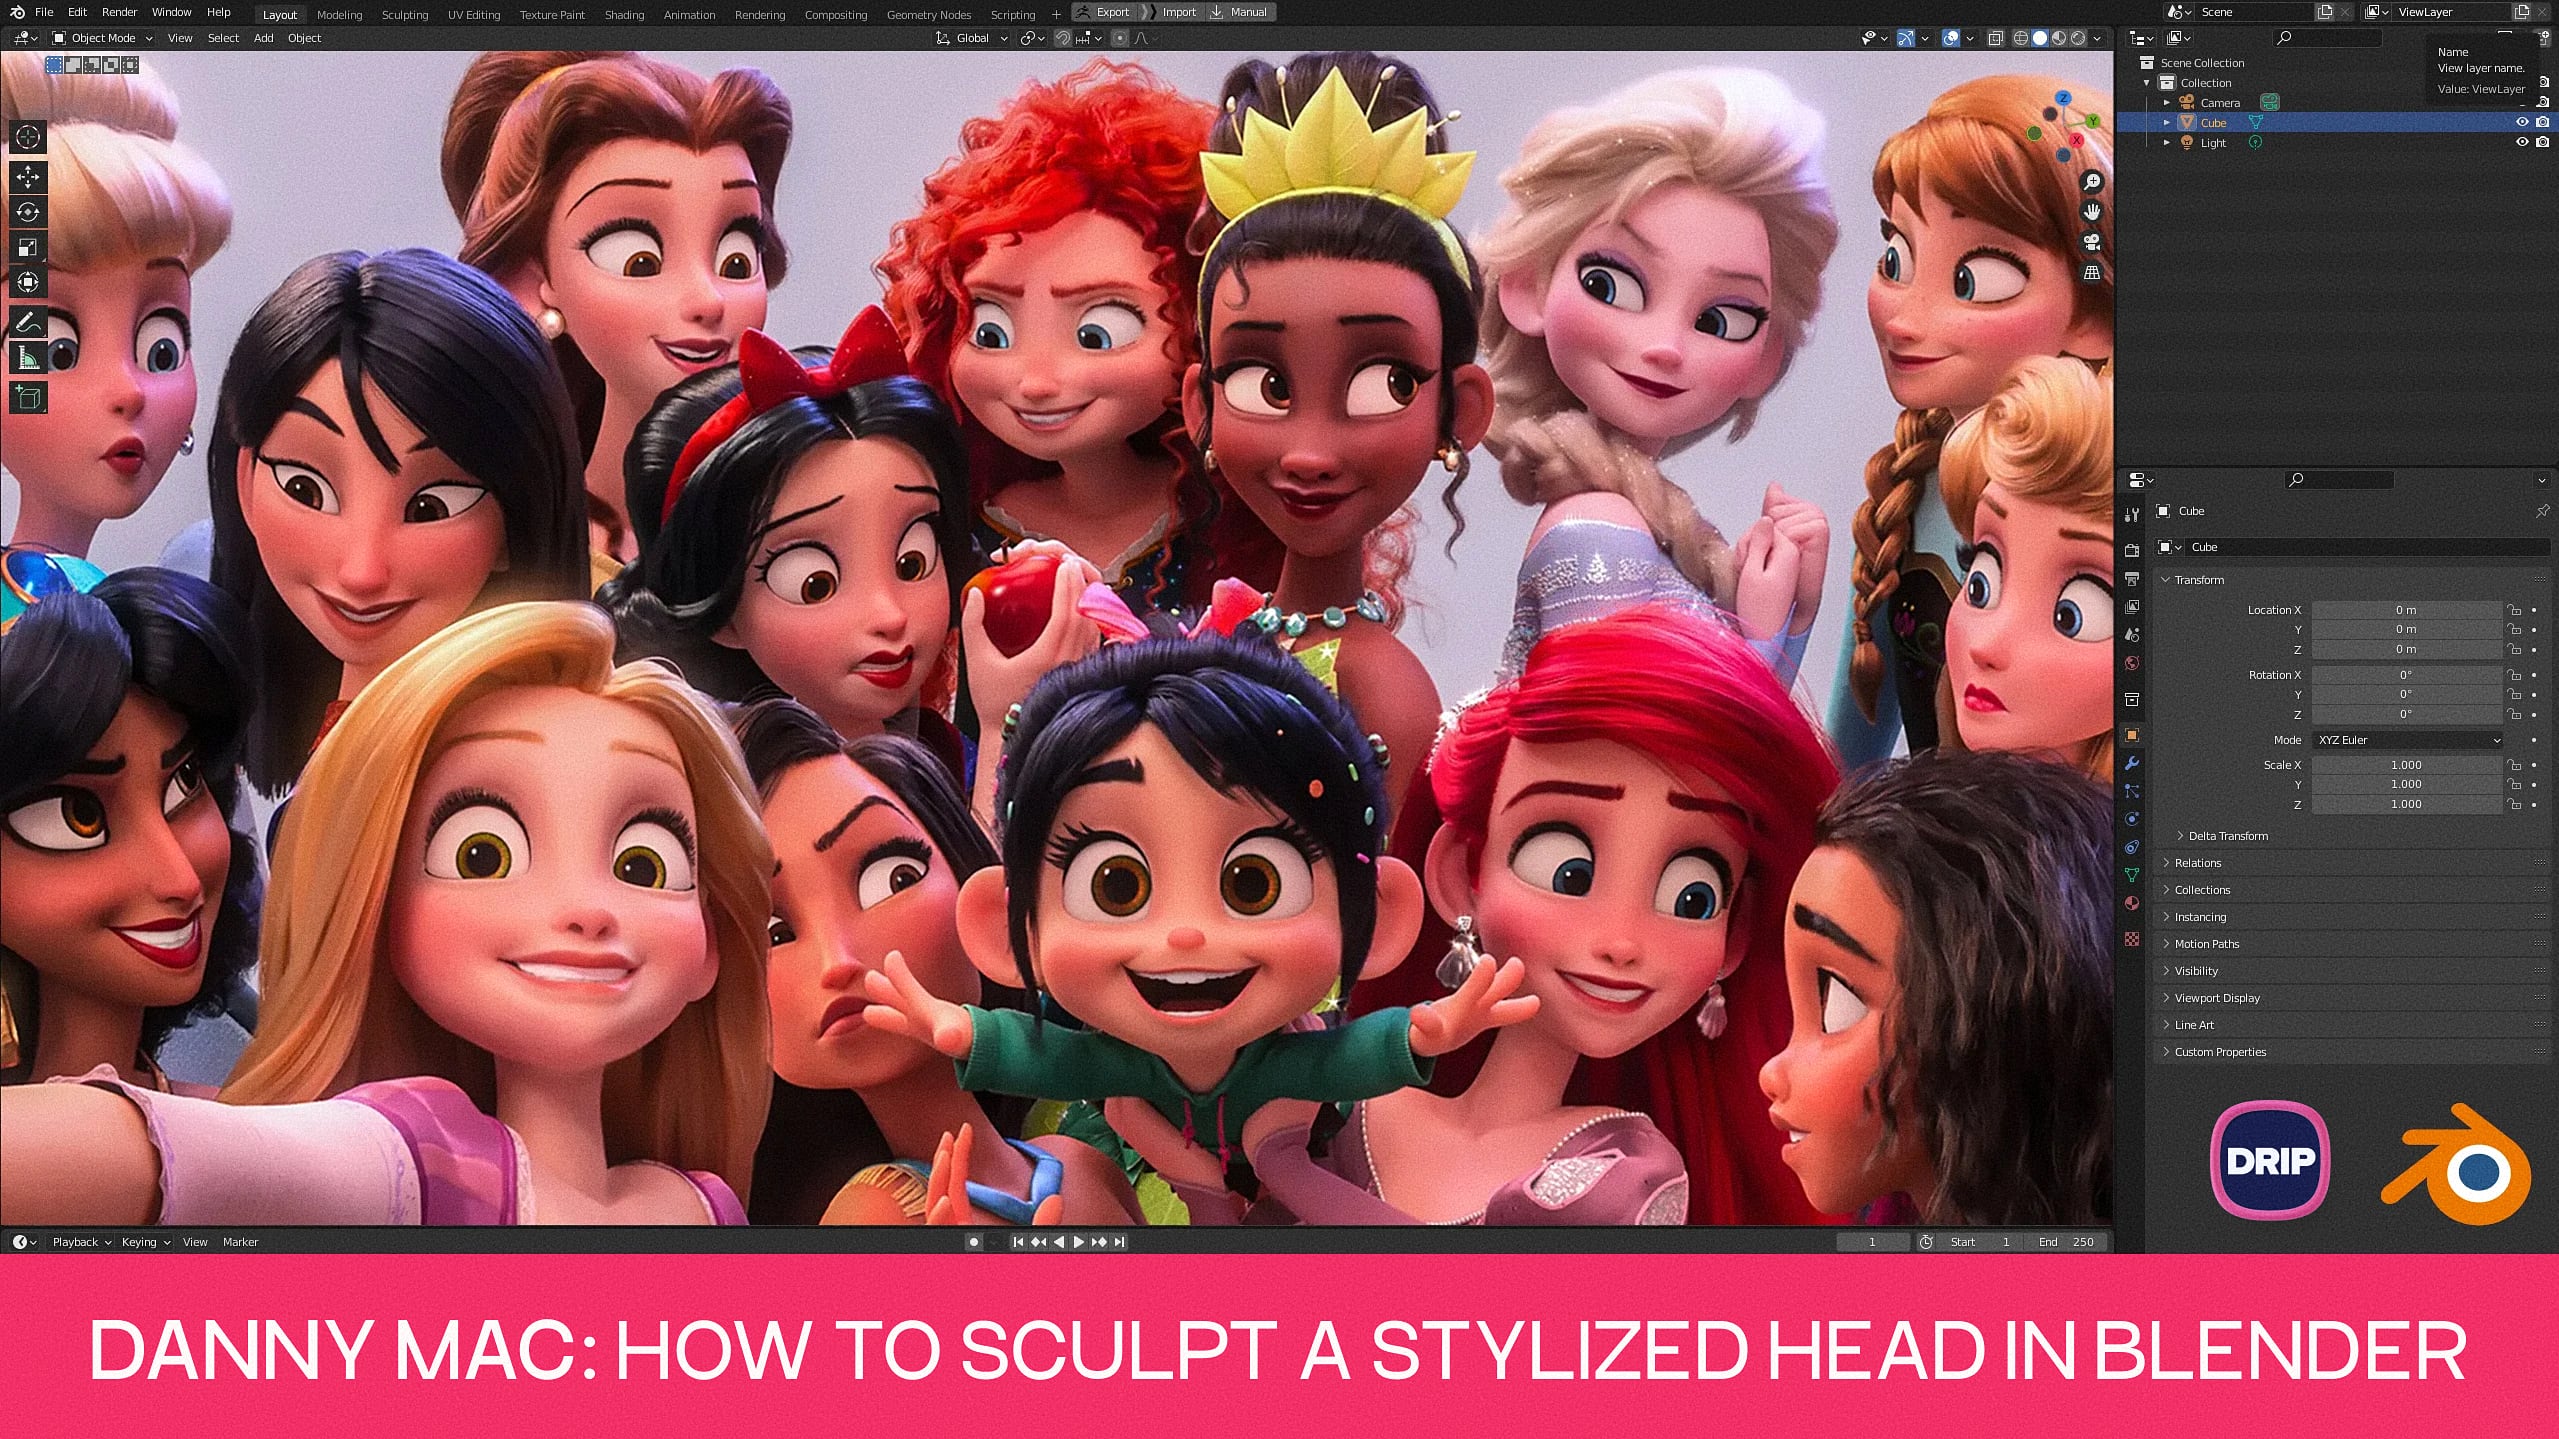 [VIP] Danny Mac: How to Sculpt a Stylized Head in Blender